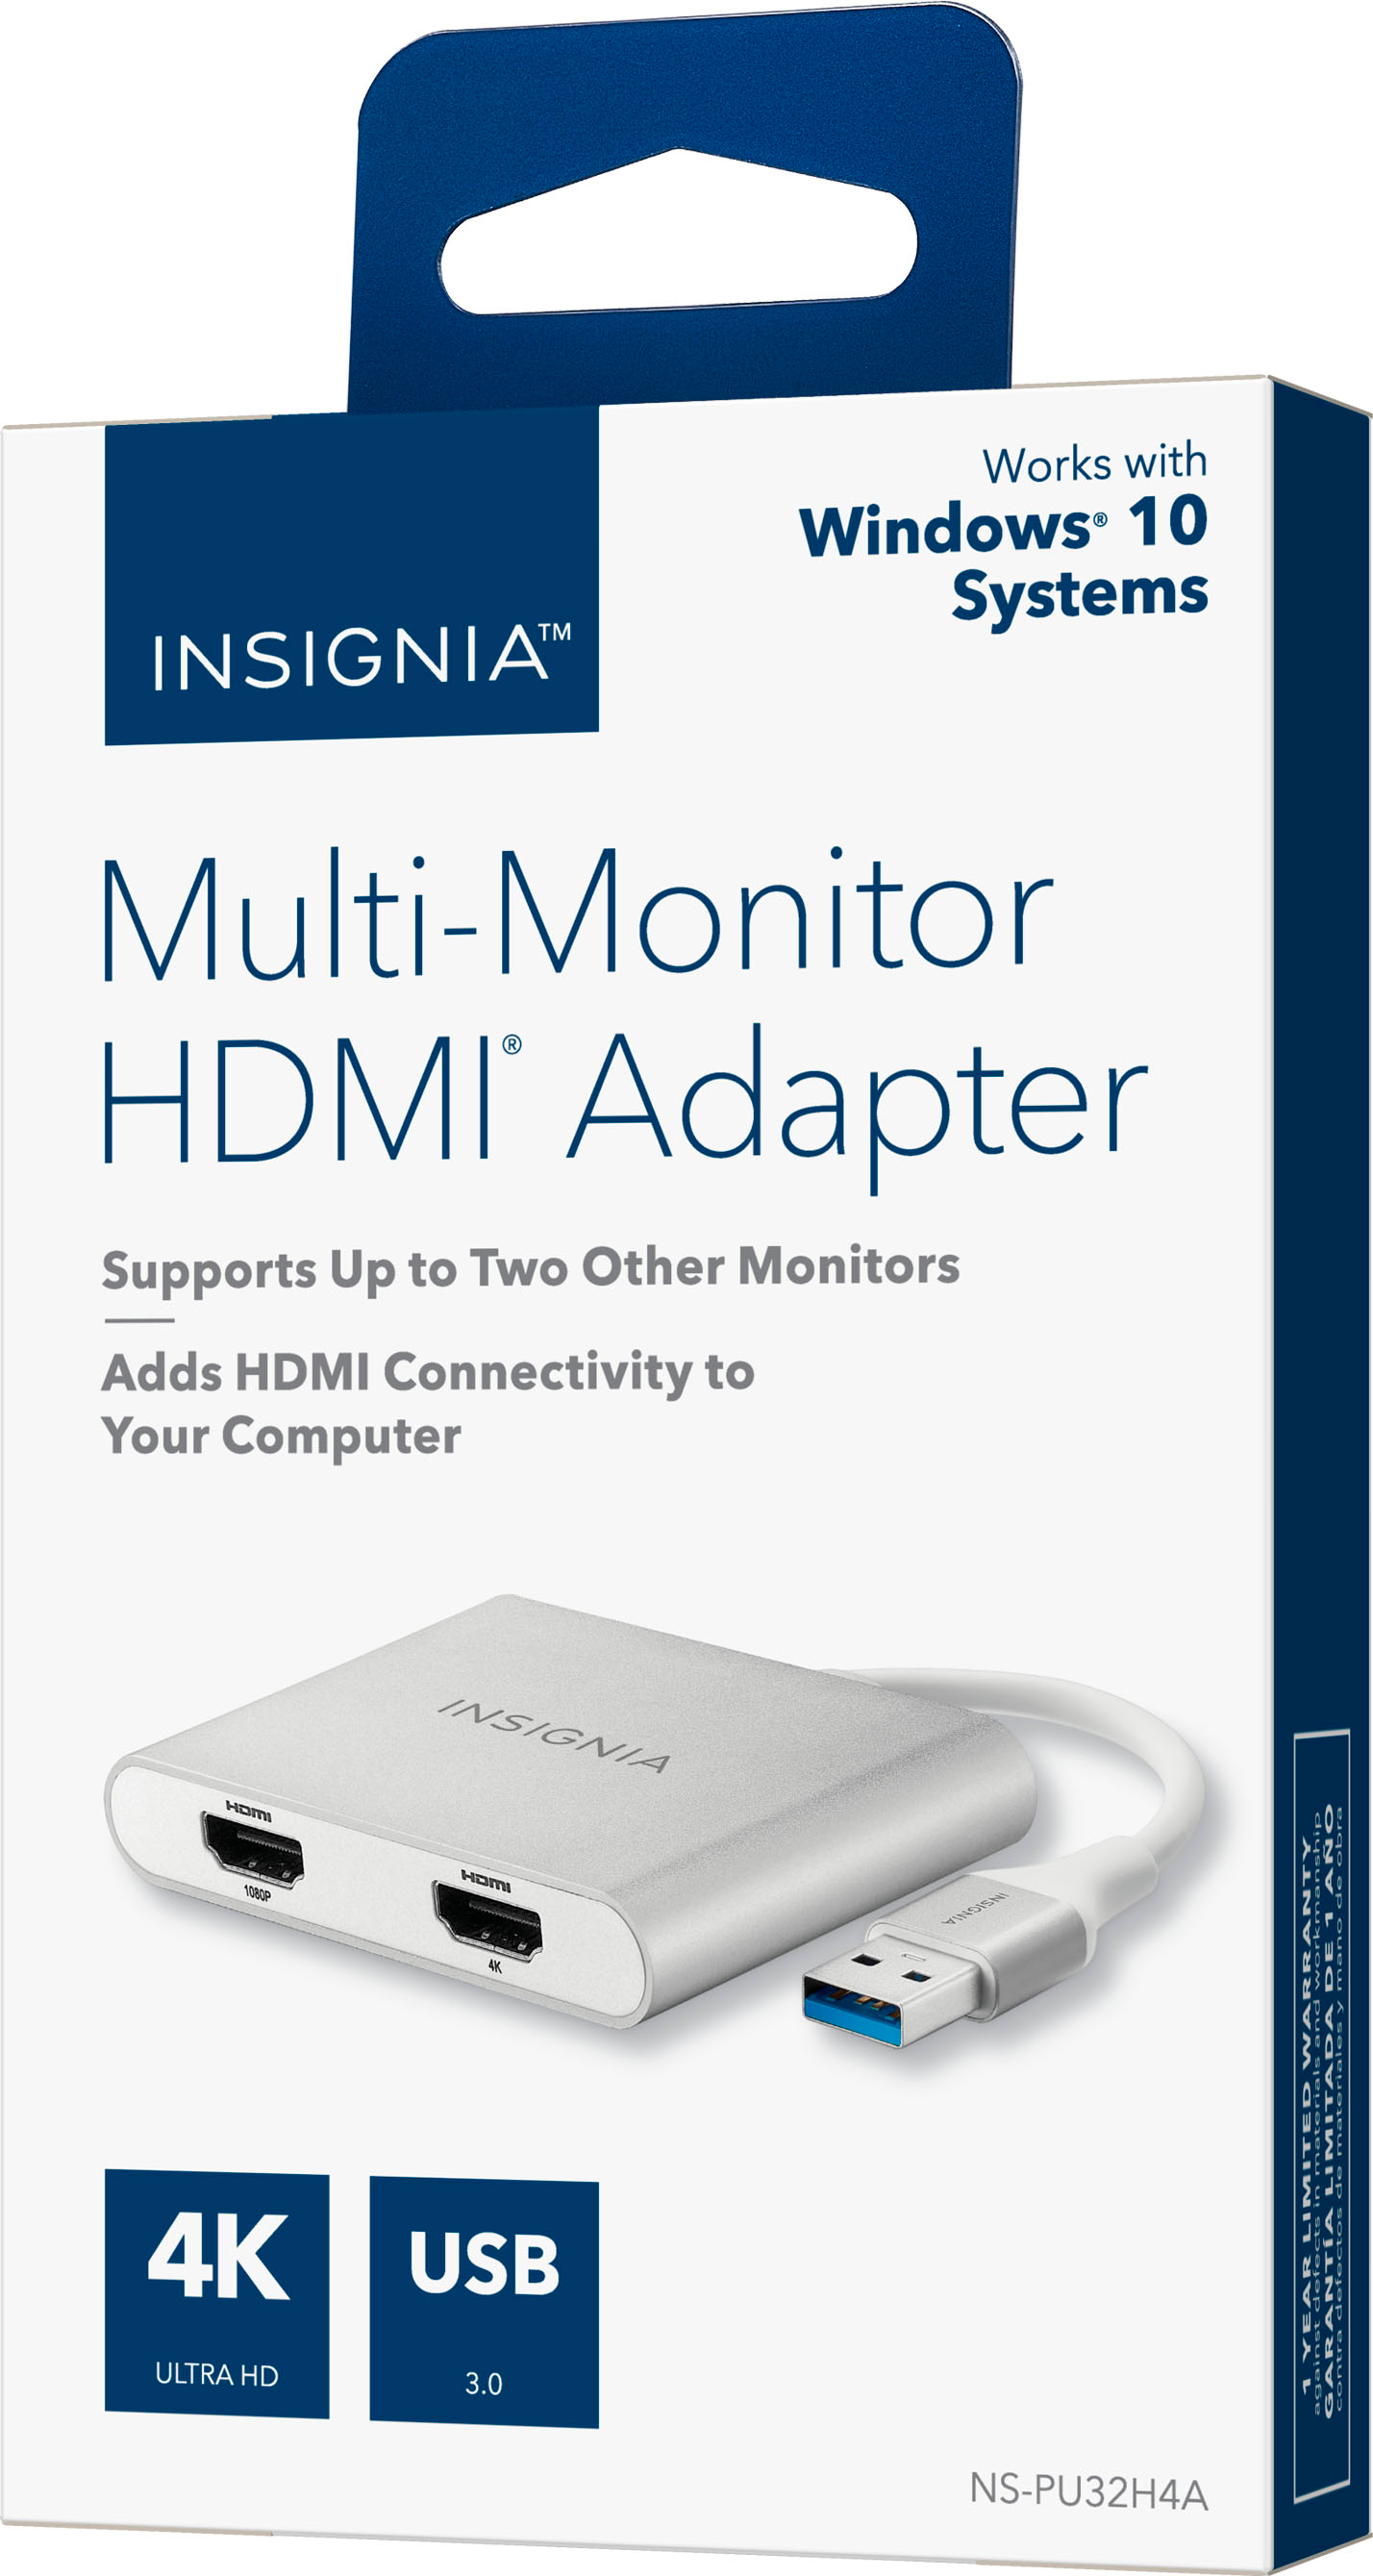 USB-A to HDMI Dual Monitor Adapter, 1080p